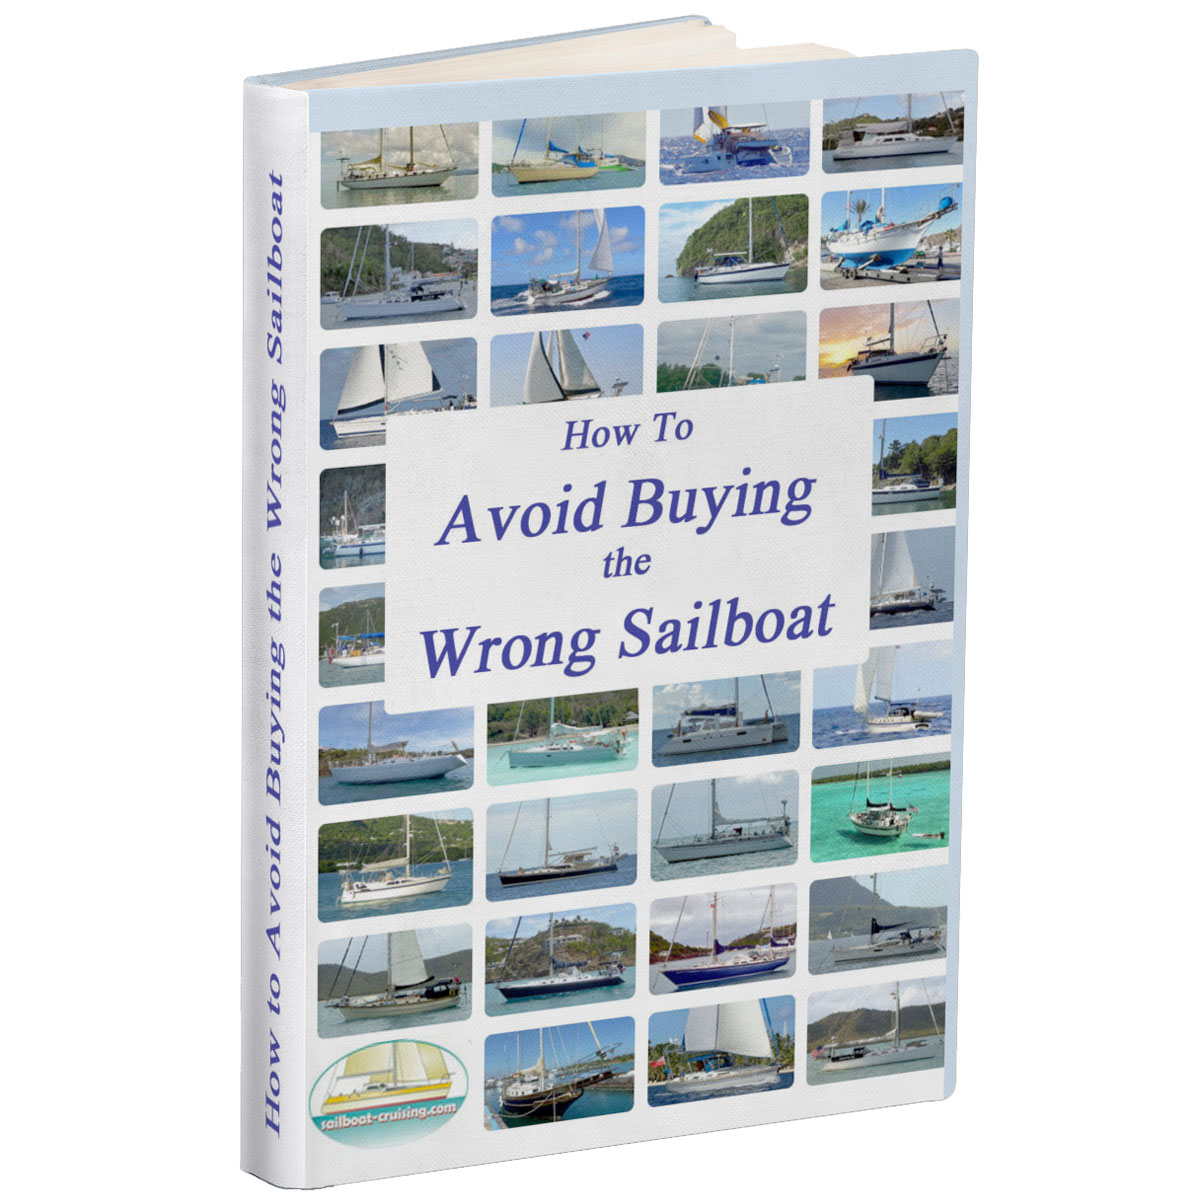 How to Avoid Buying the Wrong Sailboat is an eBook setting out a new approach to buying a sailboat